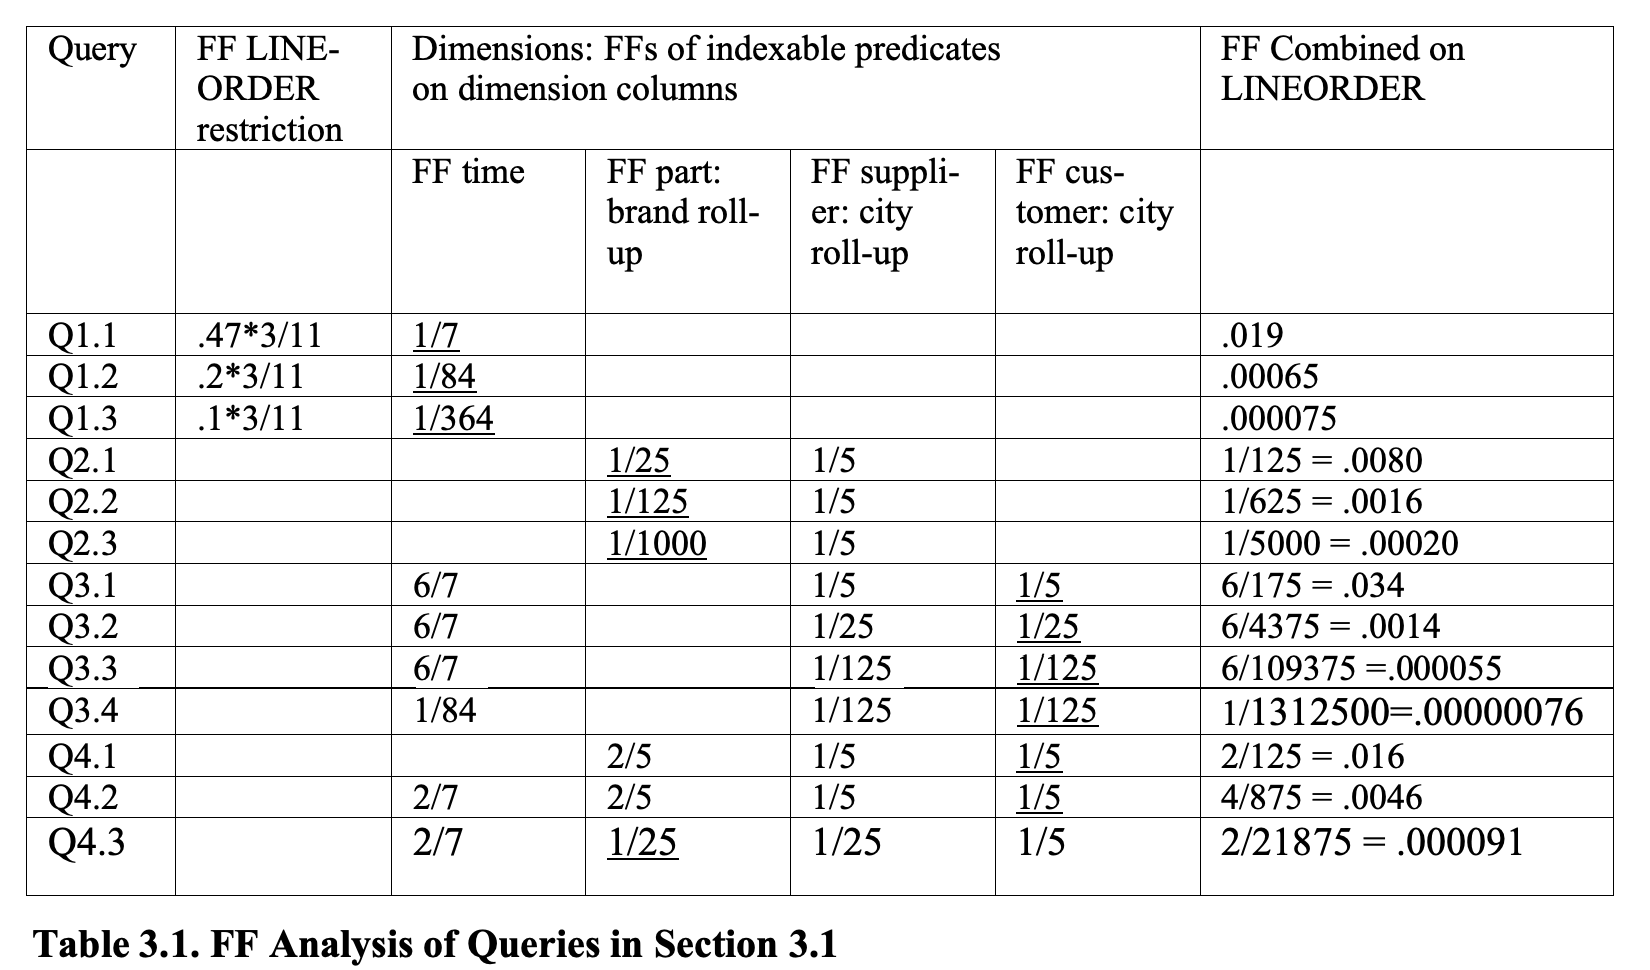 Table 3.1. FF Analysis of Queries in Section 3.1